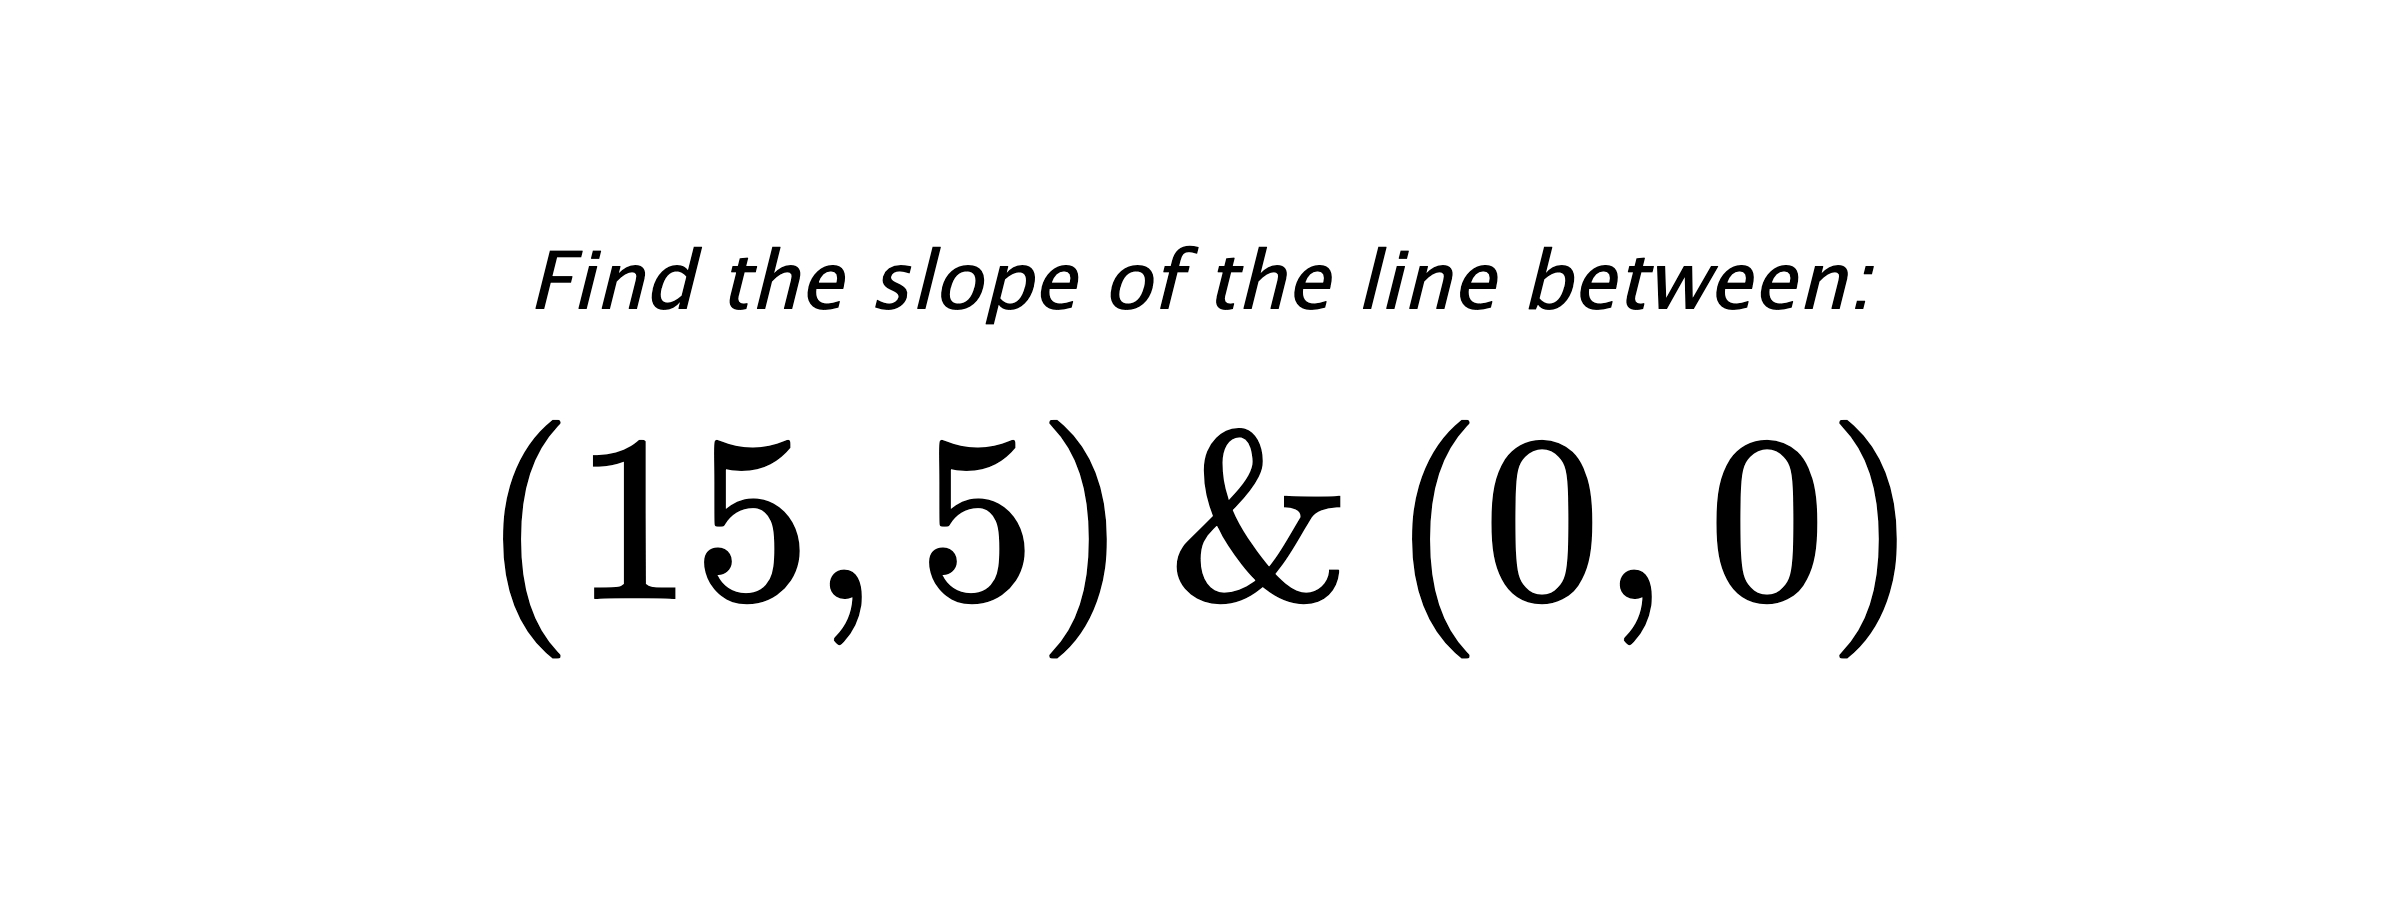 Find the slope of the line between: $ (15,5) \hspace{0.5cm} \text{&} \hspace{0.5cm} (0,0) $